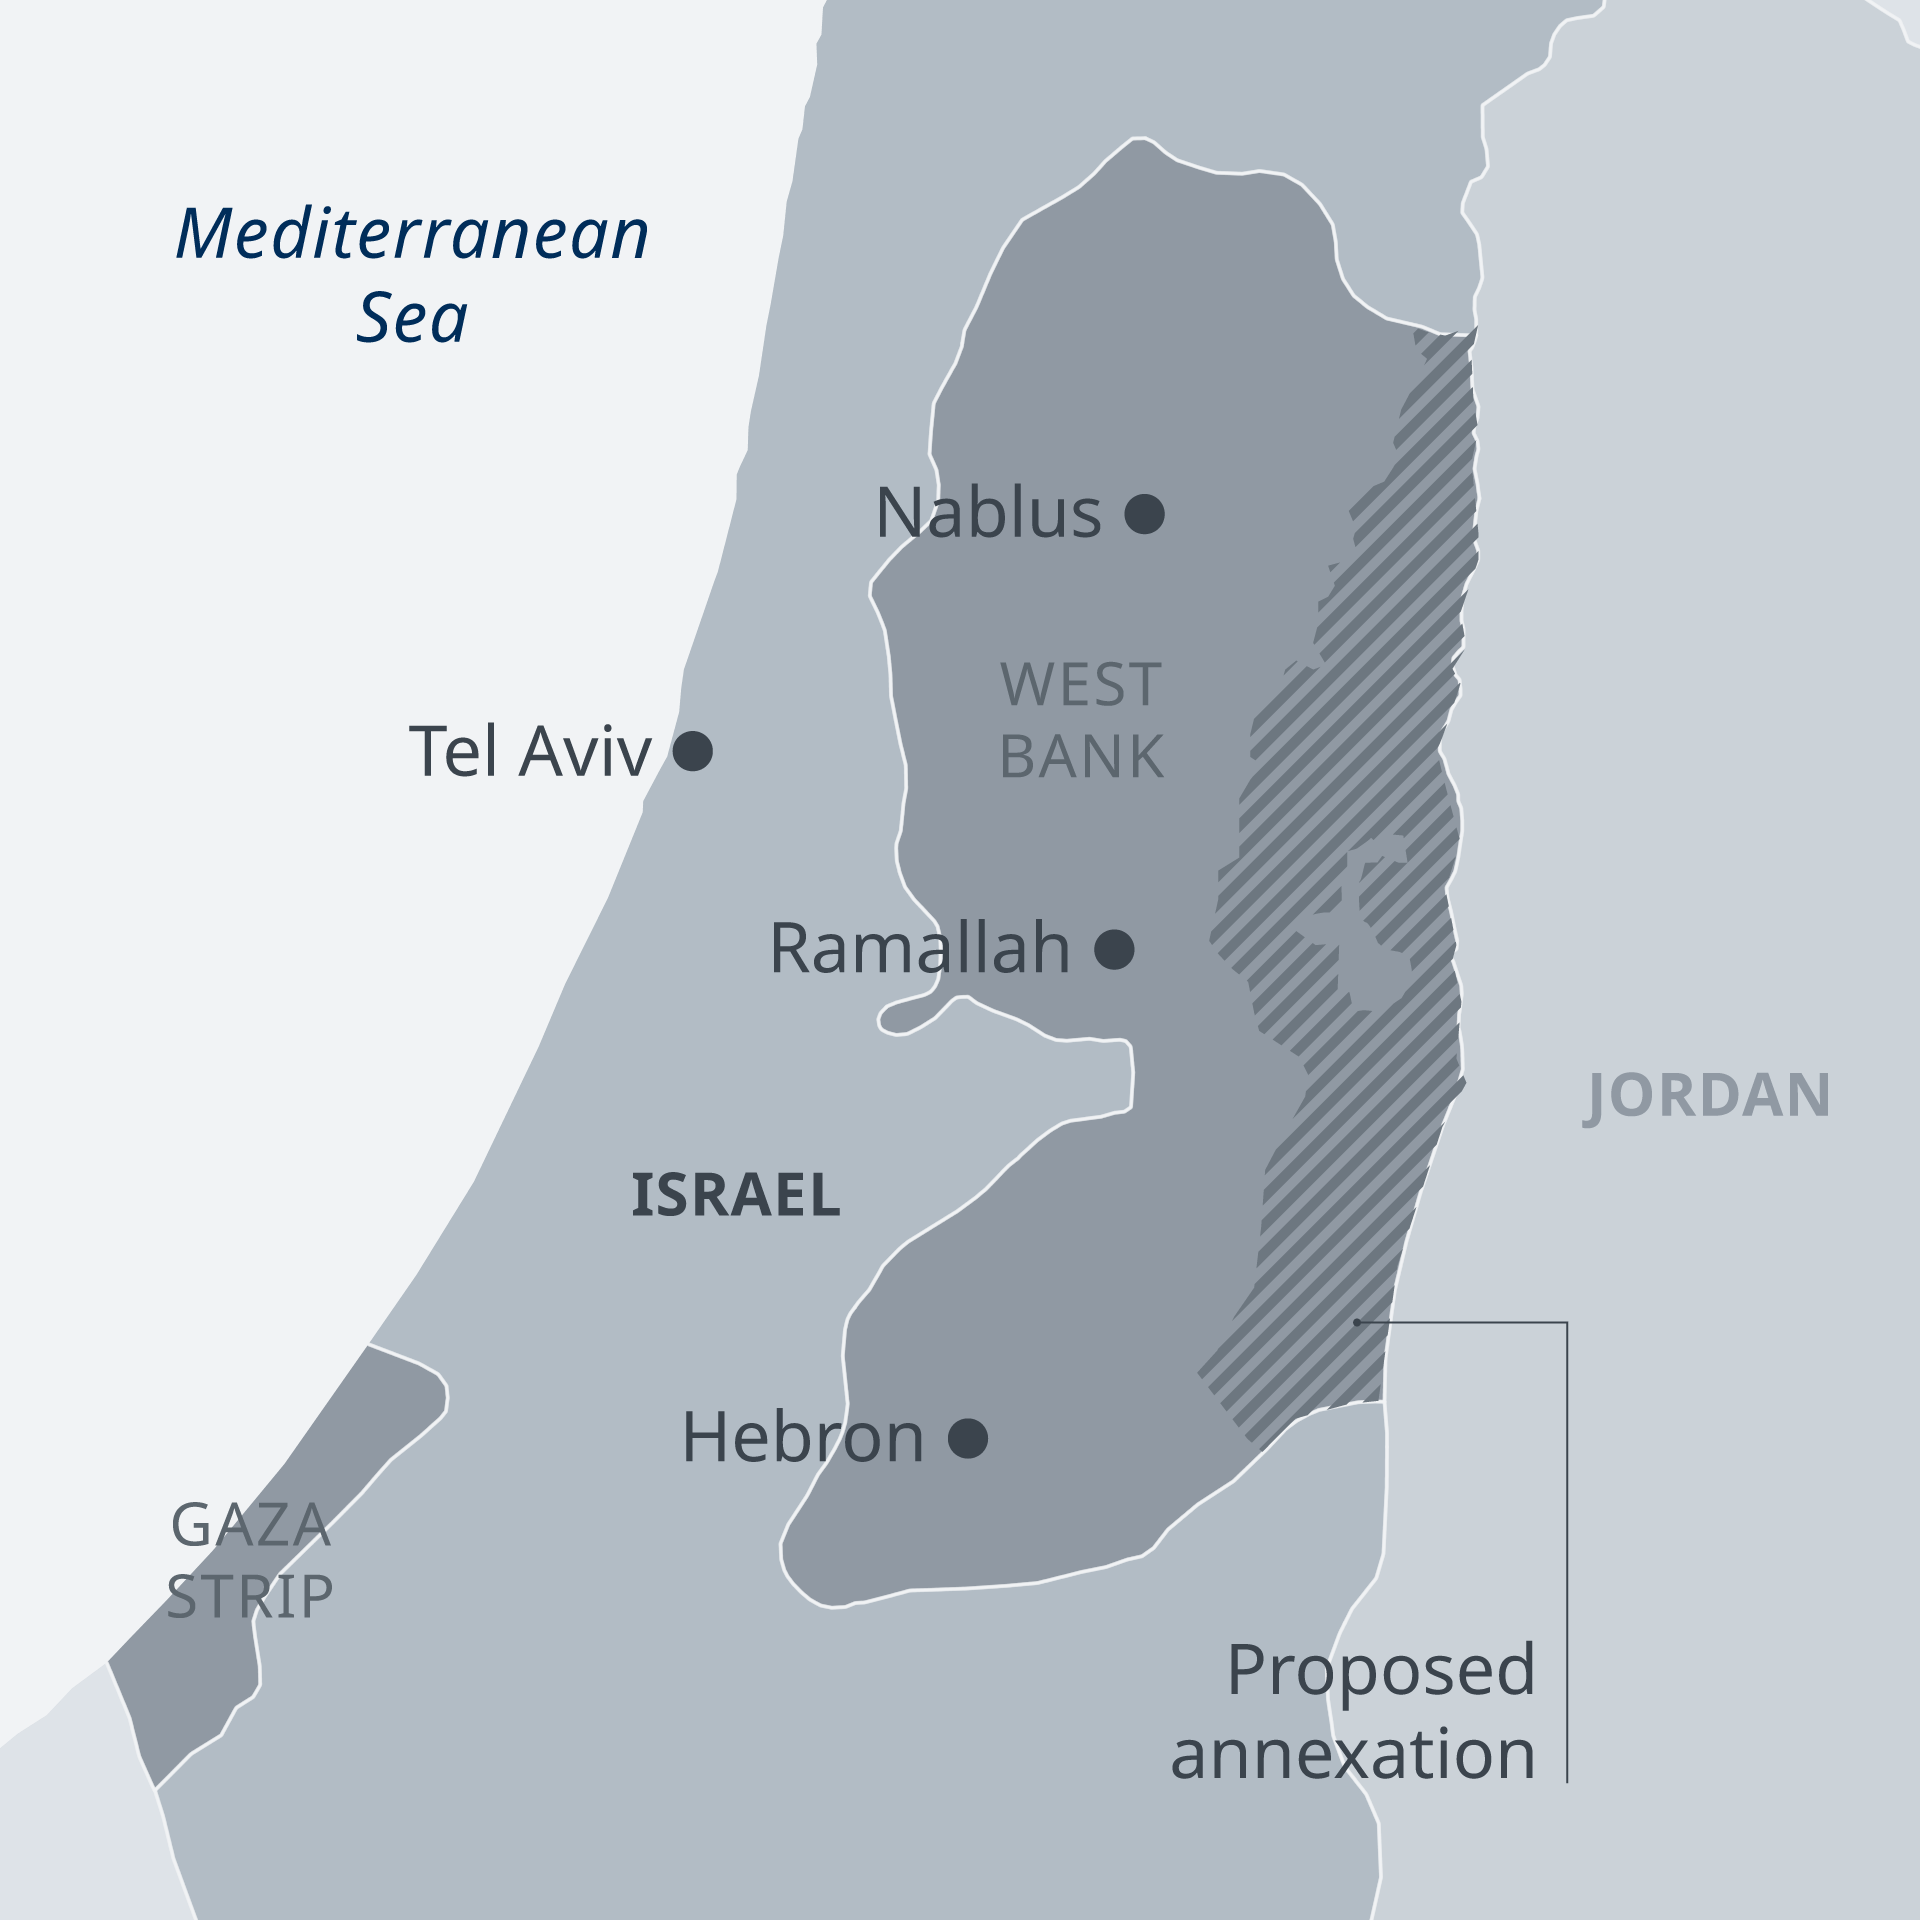 West Bank and the Jordan explained – DW – 09/11/2019